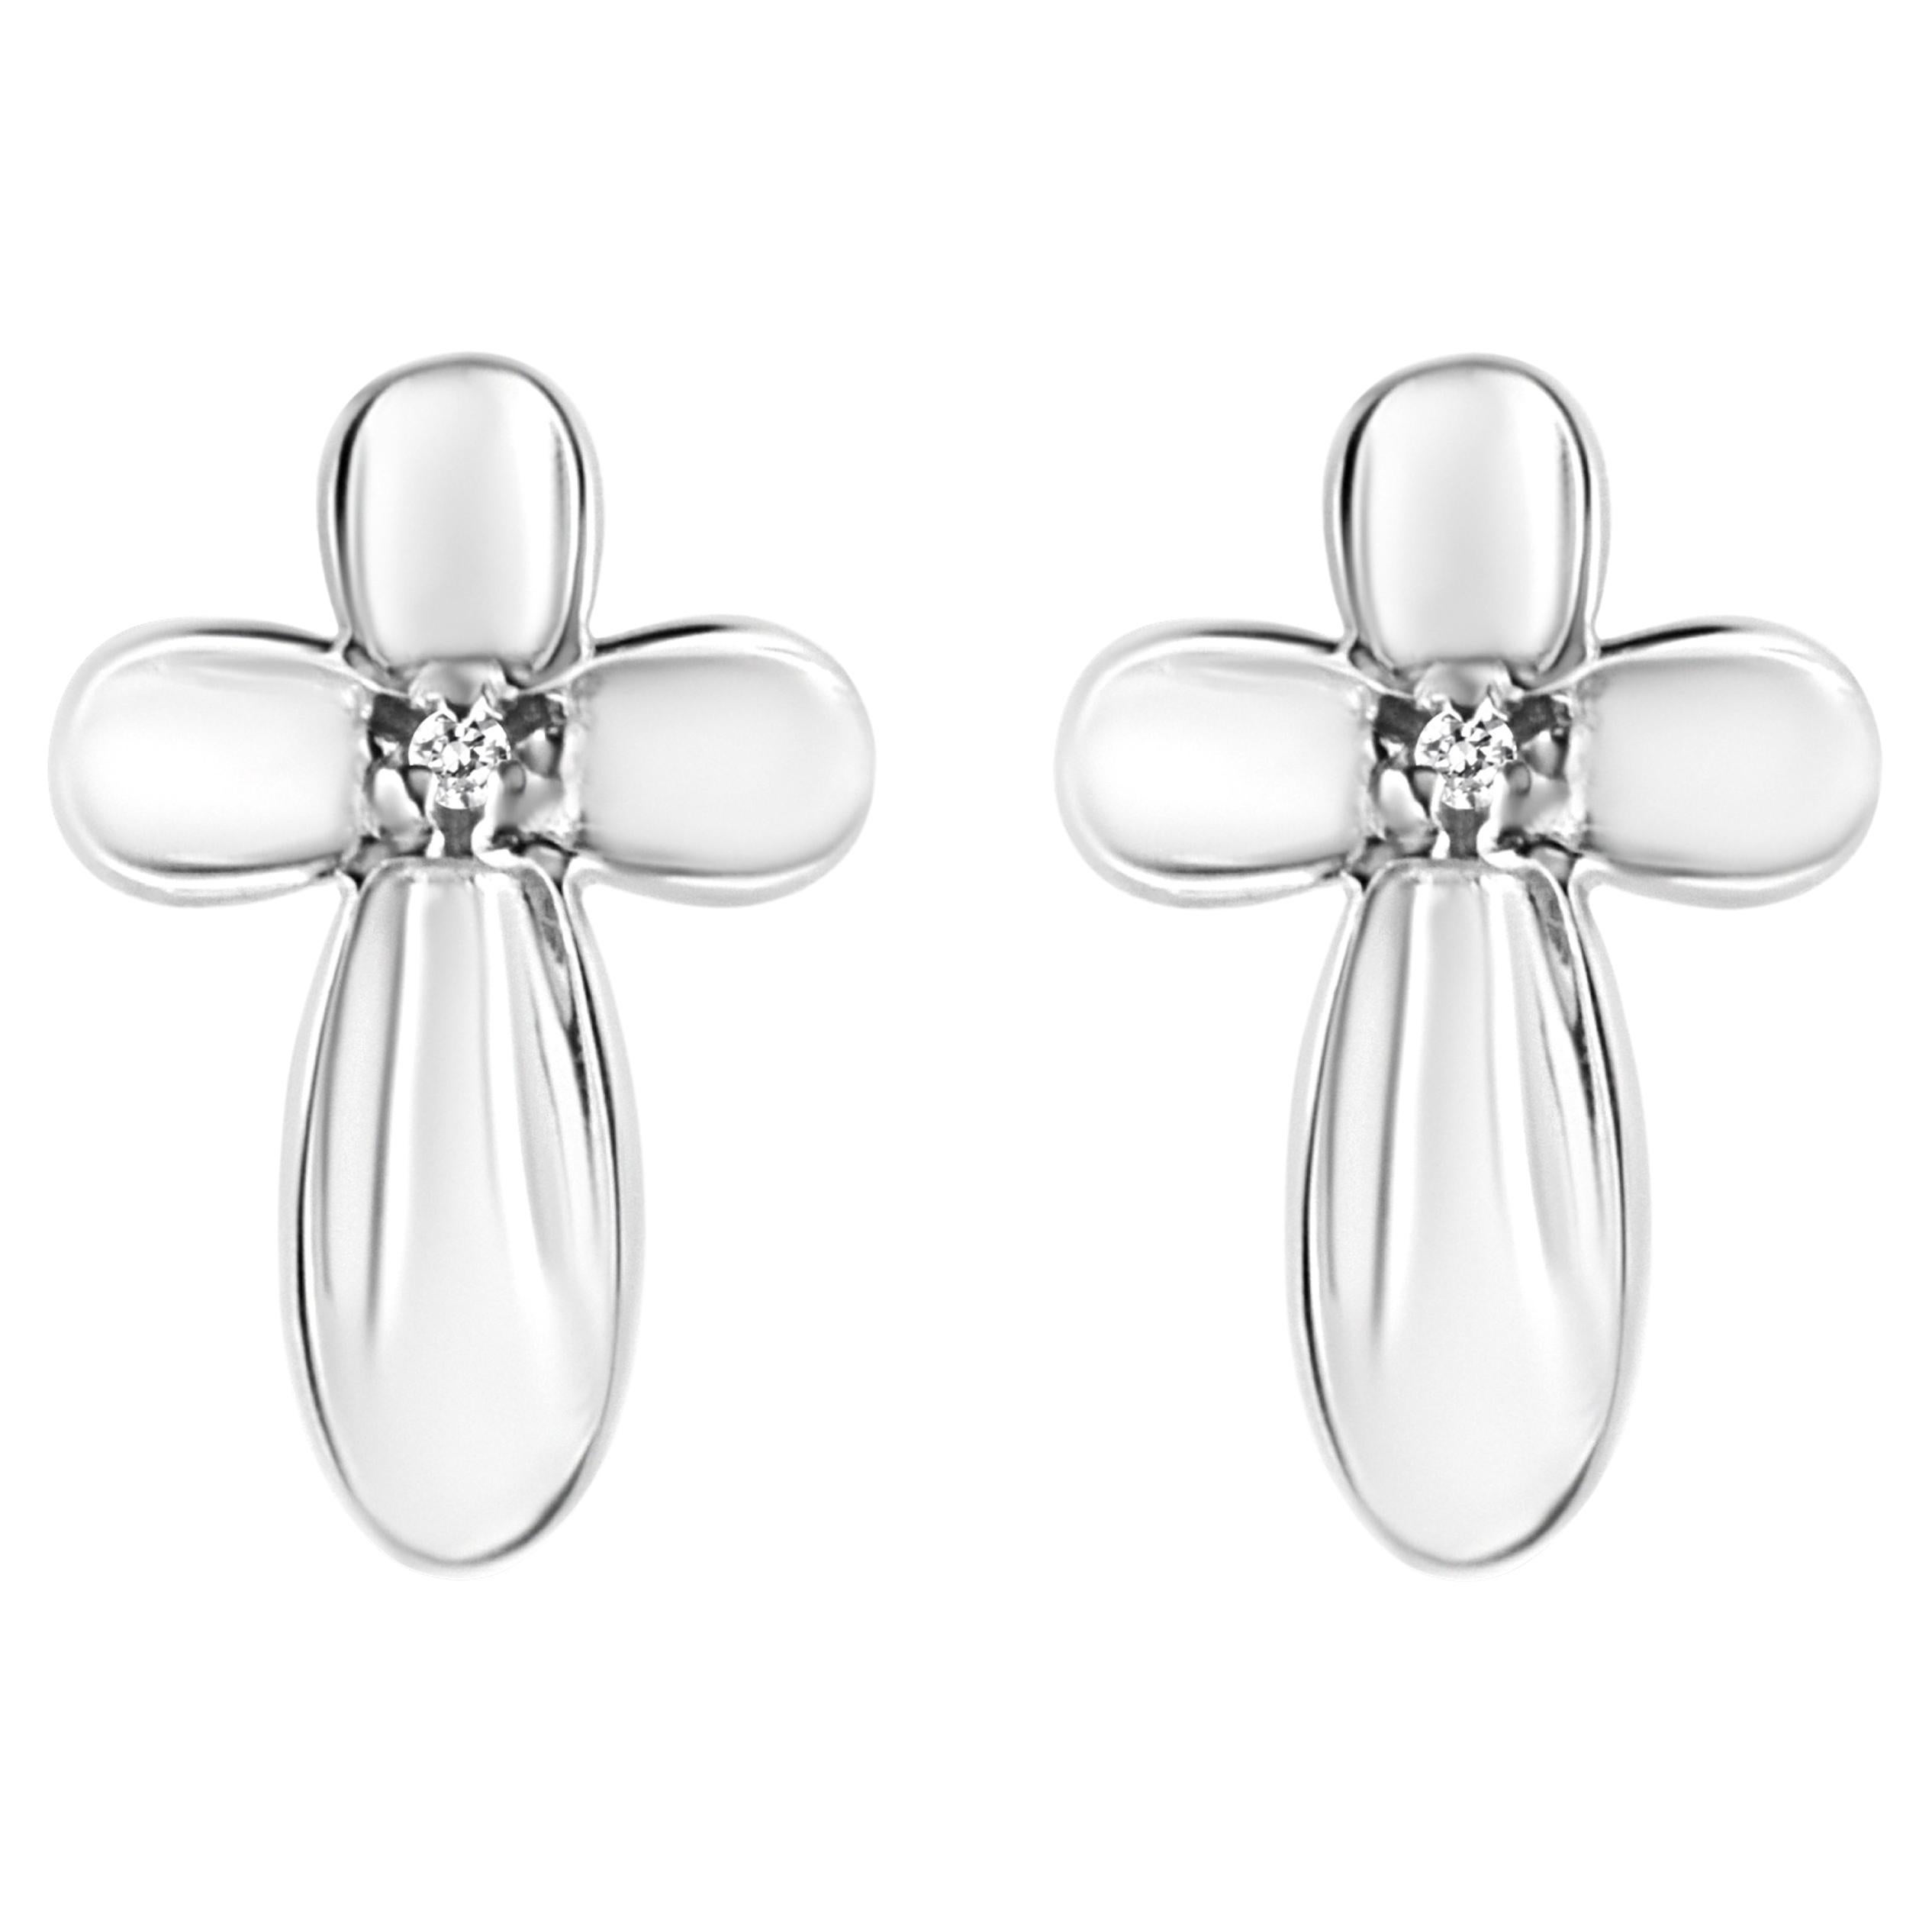 .925 Sterling Silver Prong Set Diamond Accent Floral Cross Stud Earrings